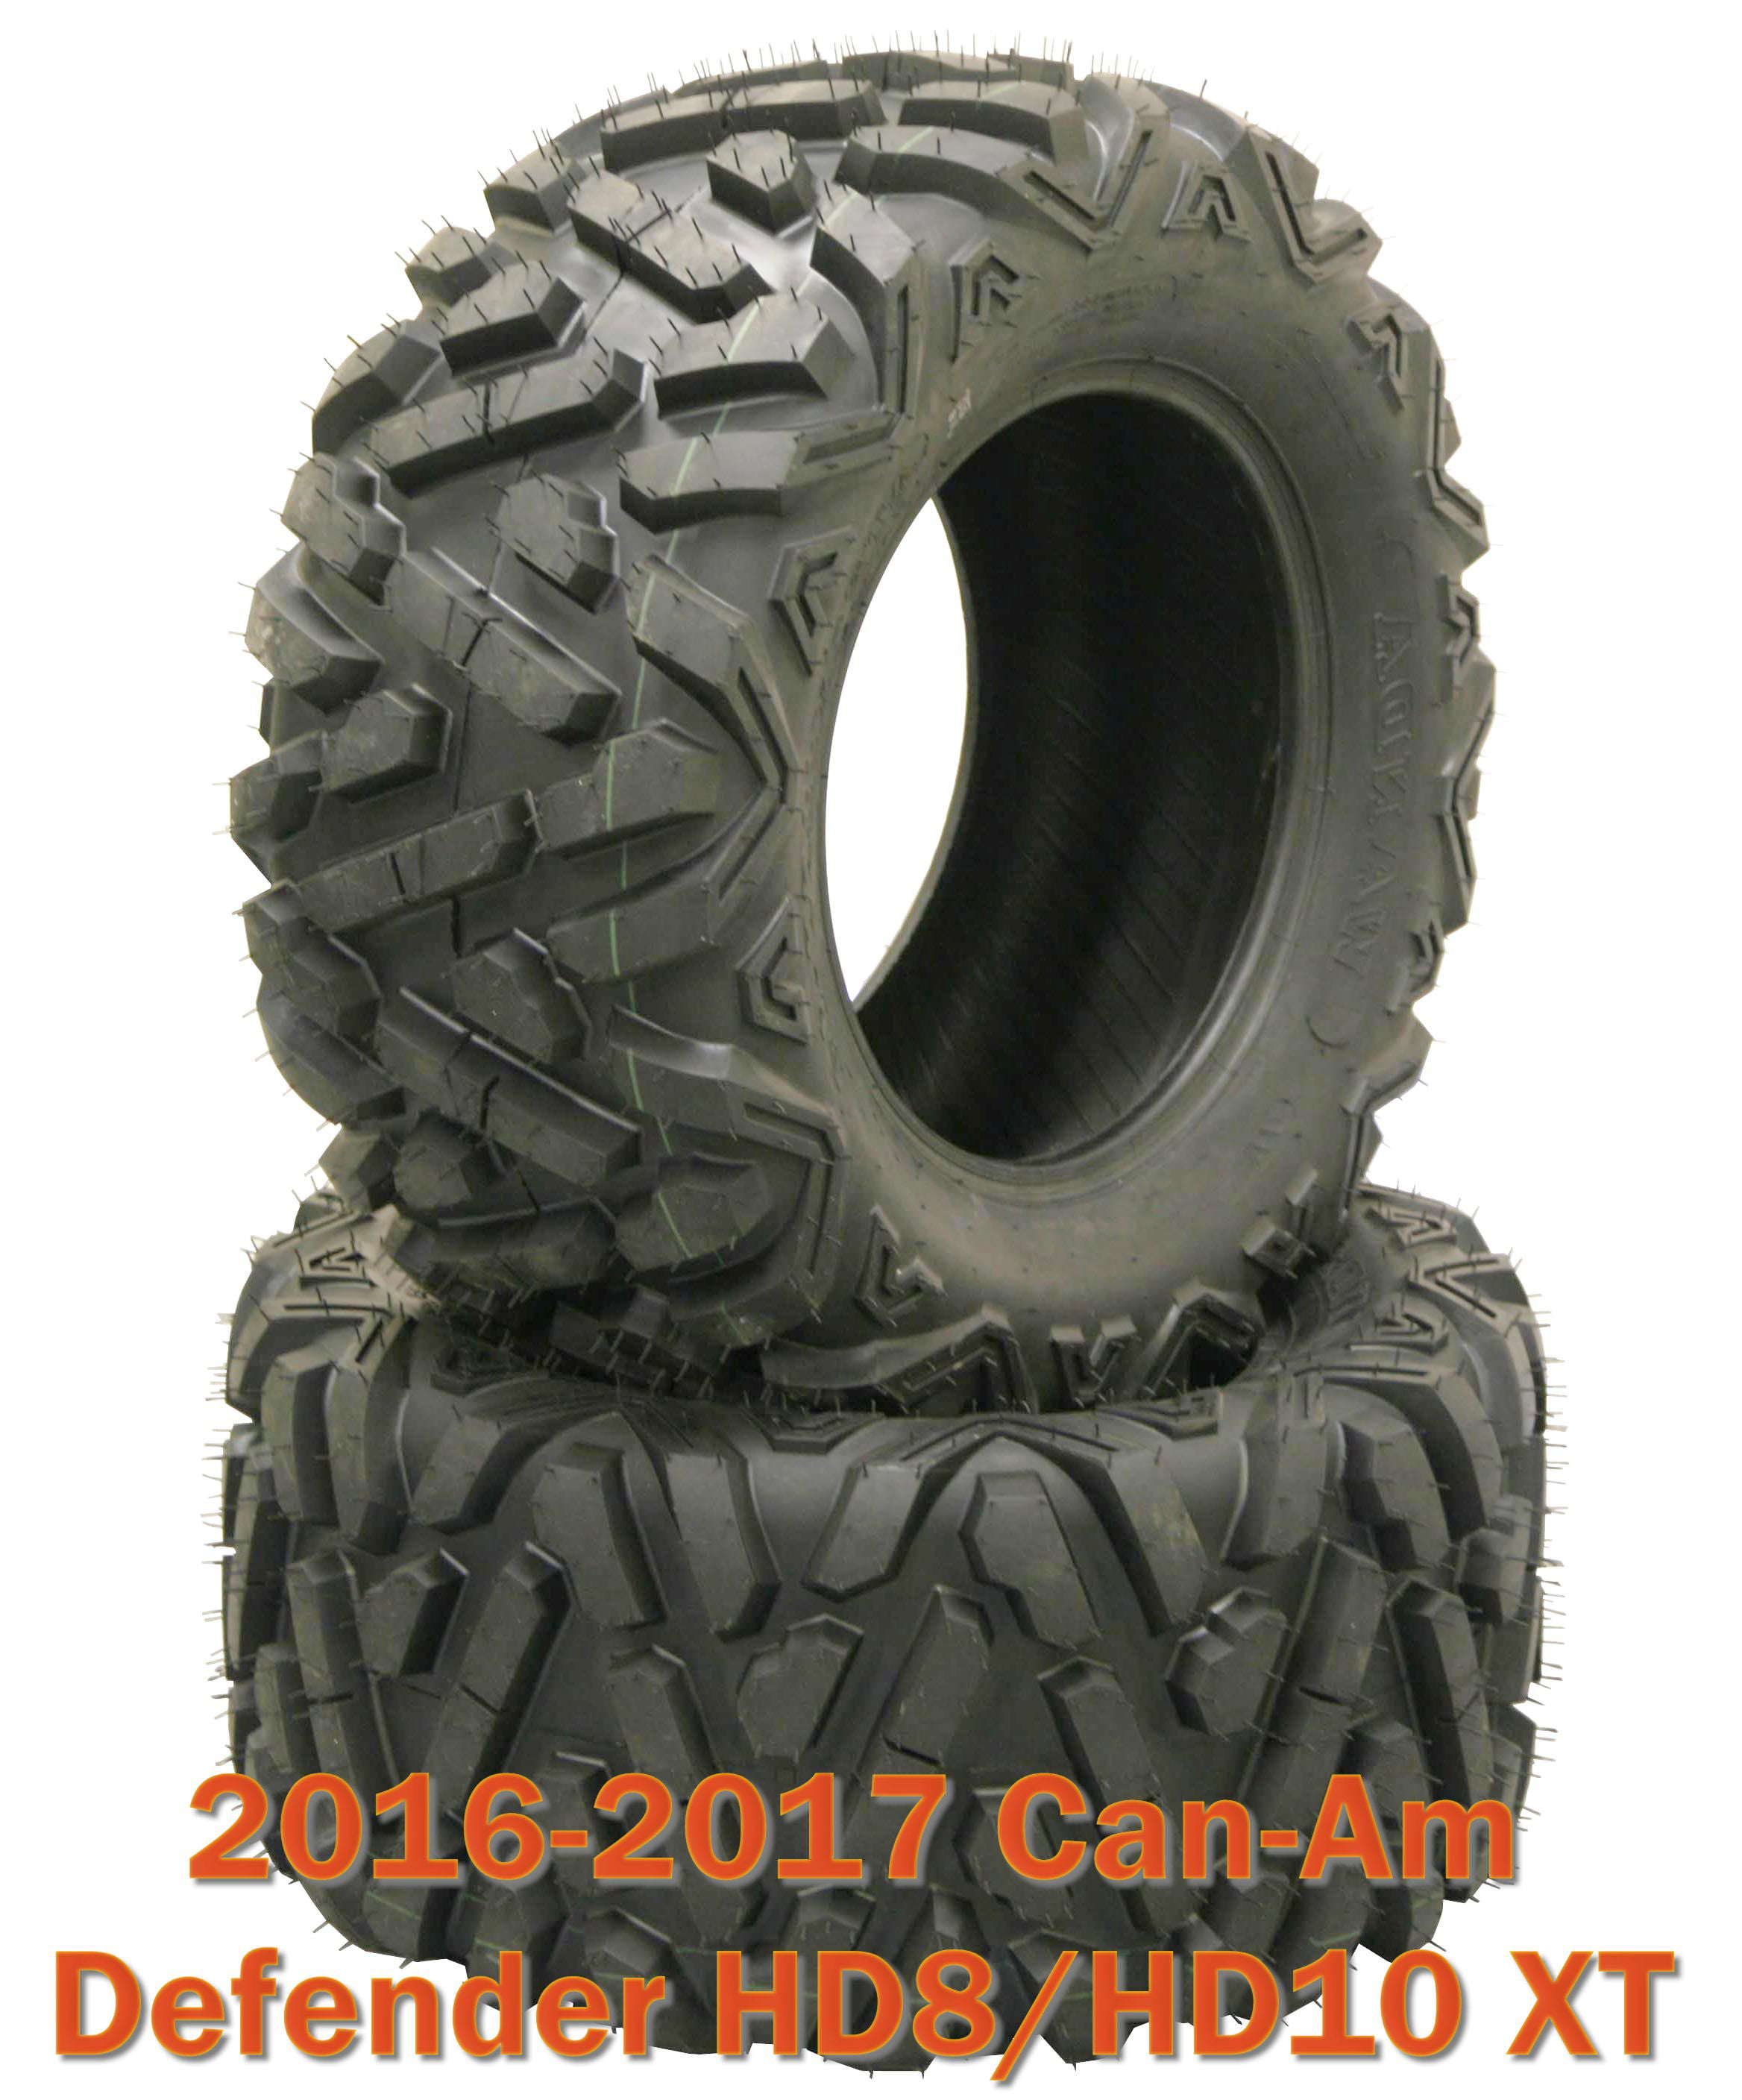 Set 4 Radial ATV Tires 27x9R14 & 27x11R14 for 16-17 Can-Am Defender HD8/HD10 XT 